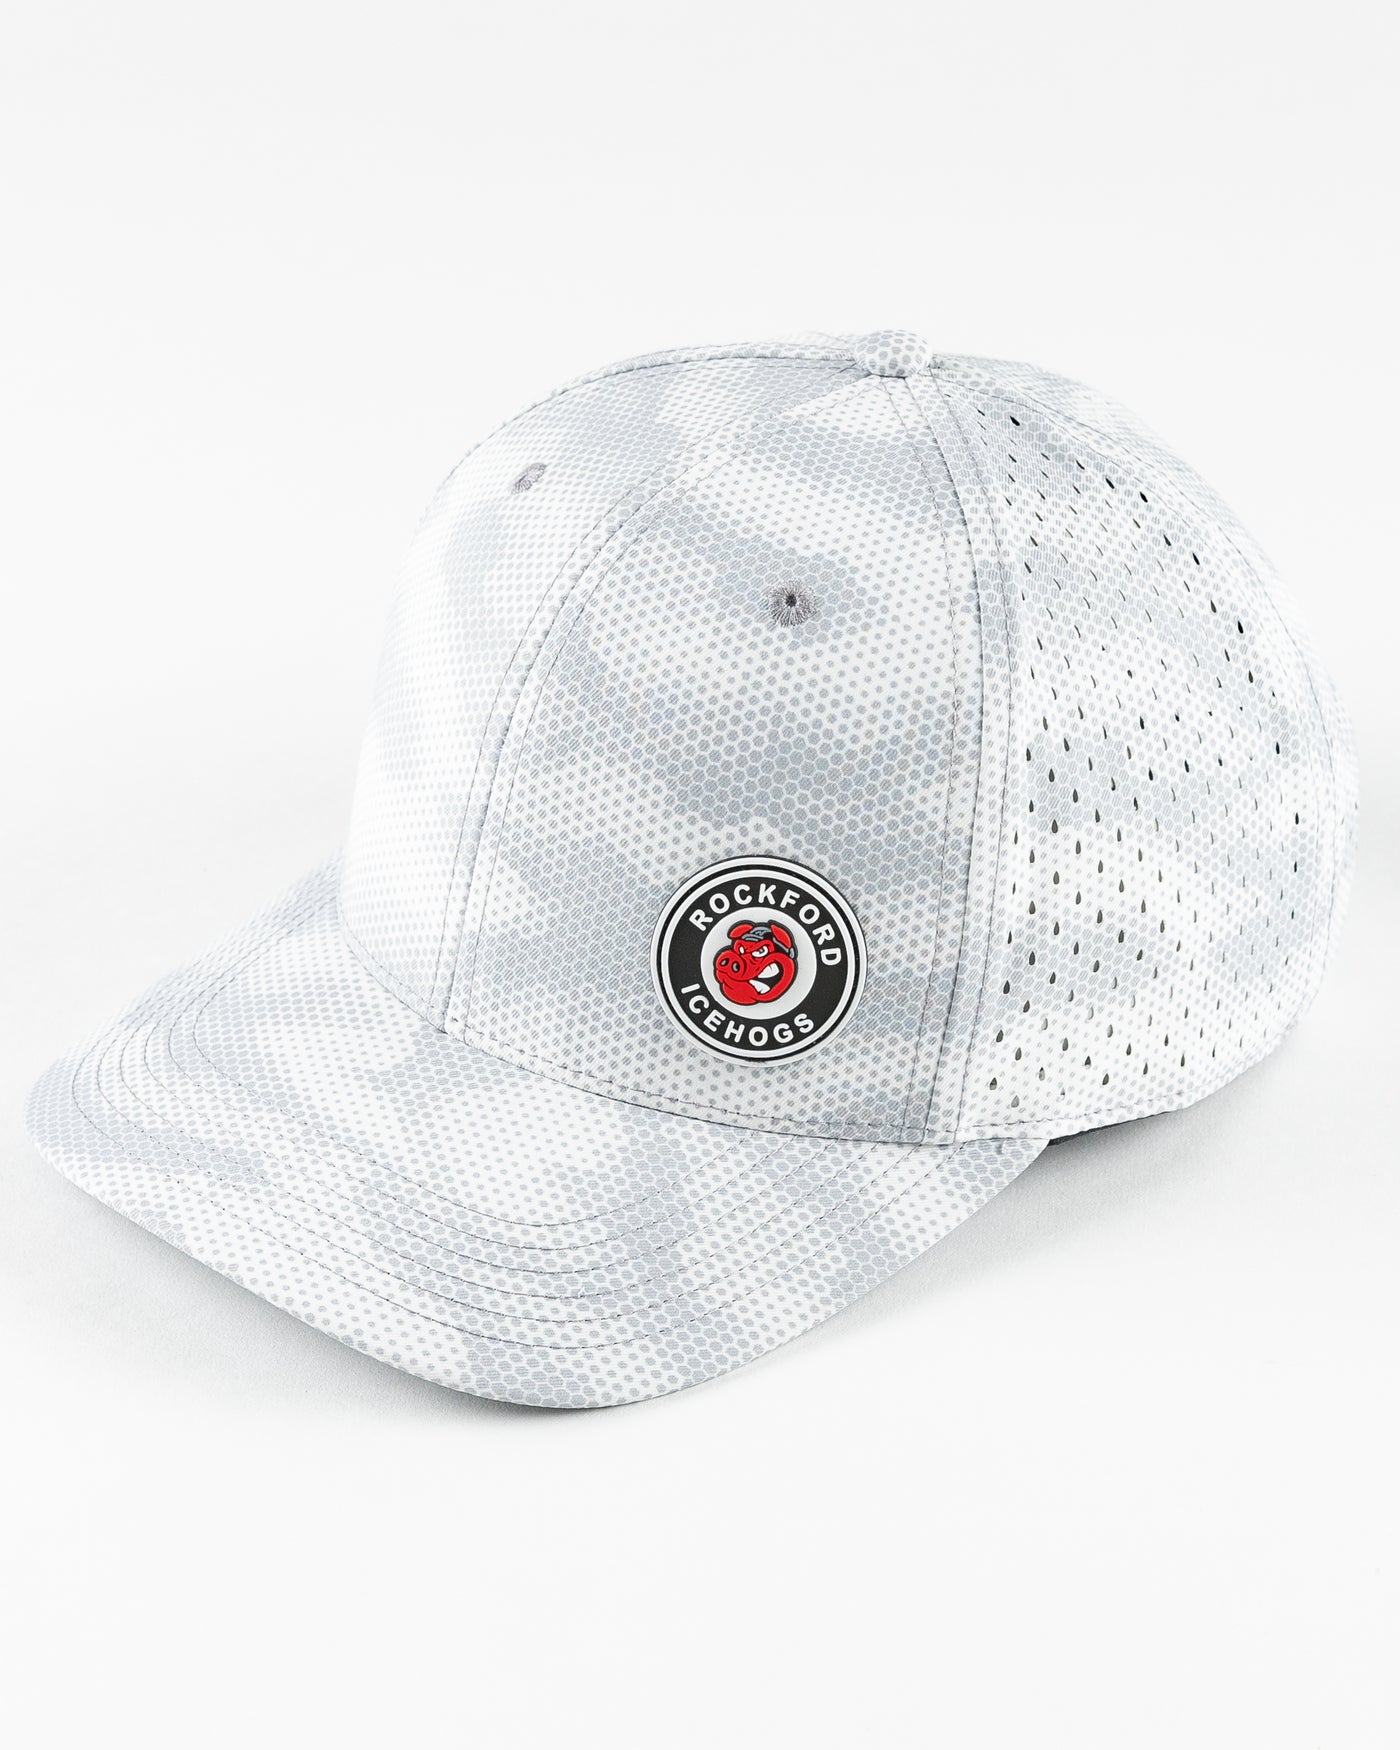 grey Rockford IceHogs adjustable cap with grey camo dot design and rubber patch on front panel - left angle lay flat